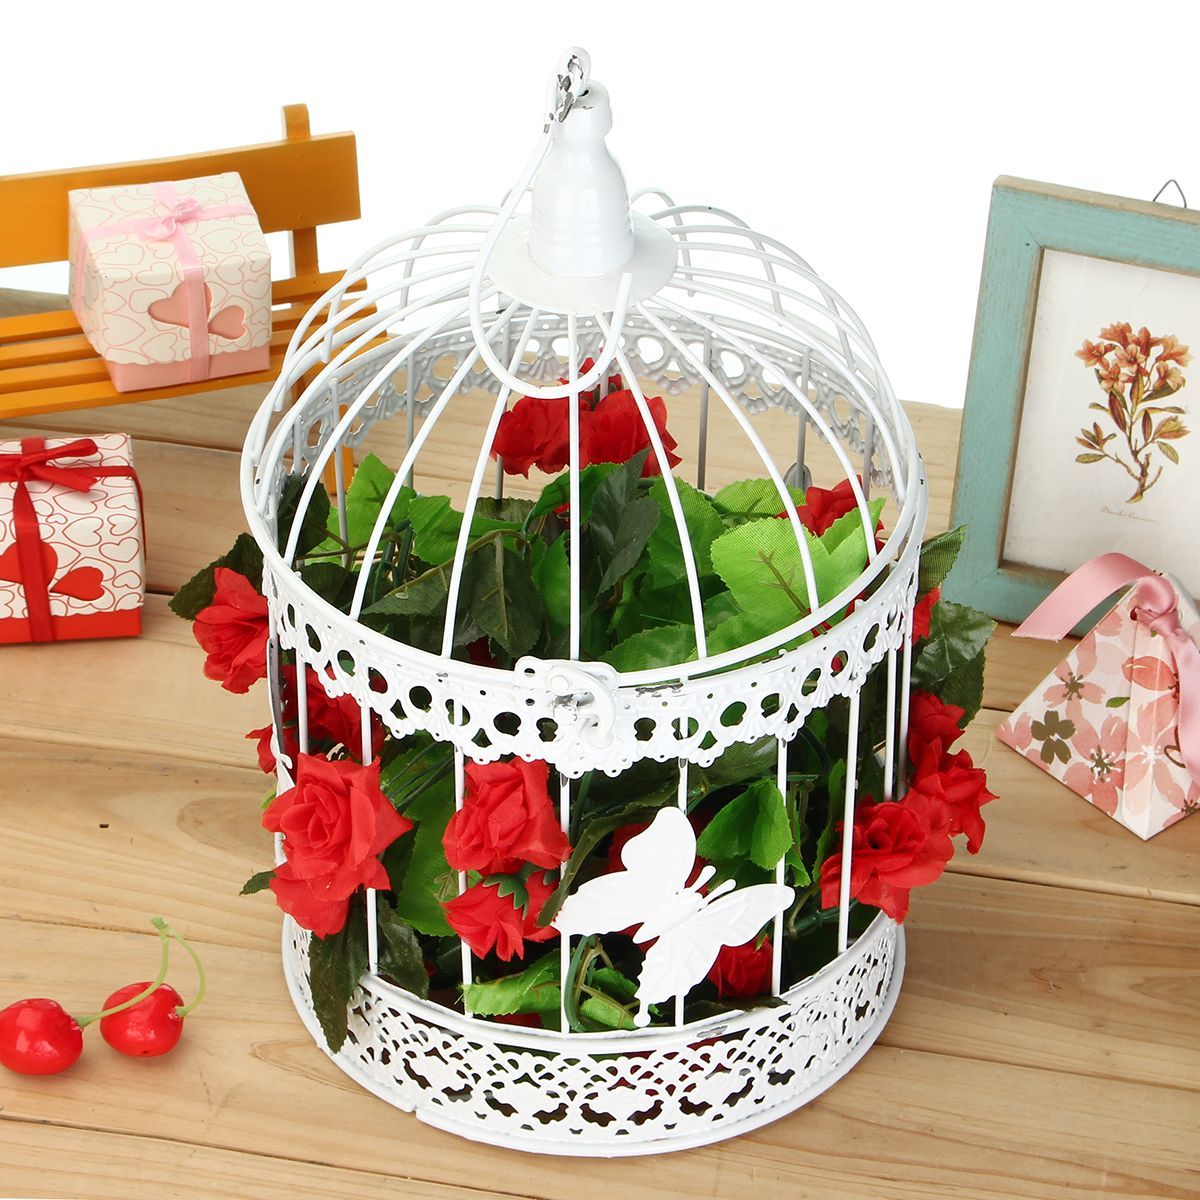 Wishing-Well-Bird-Cage-Wedding-White-Birdcage-Cards-Round-Box-Decorations-Ornaments-1557365